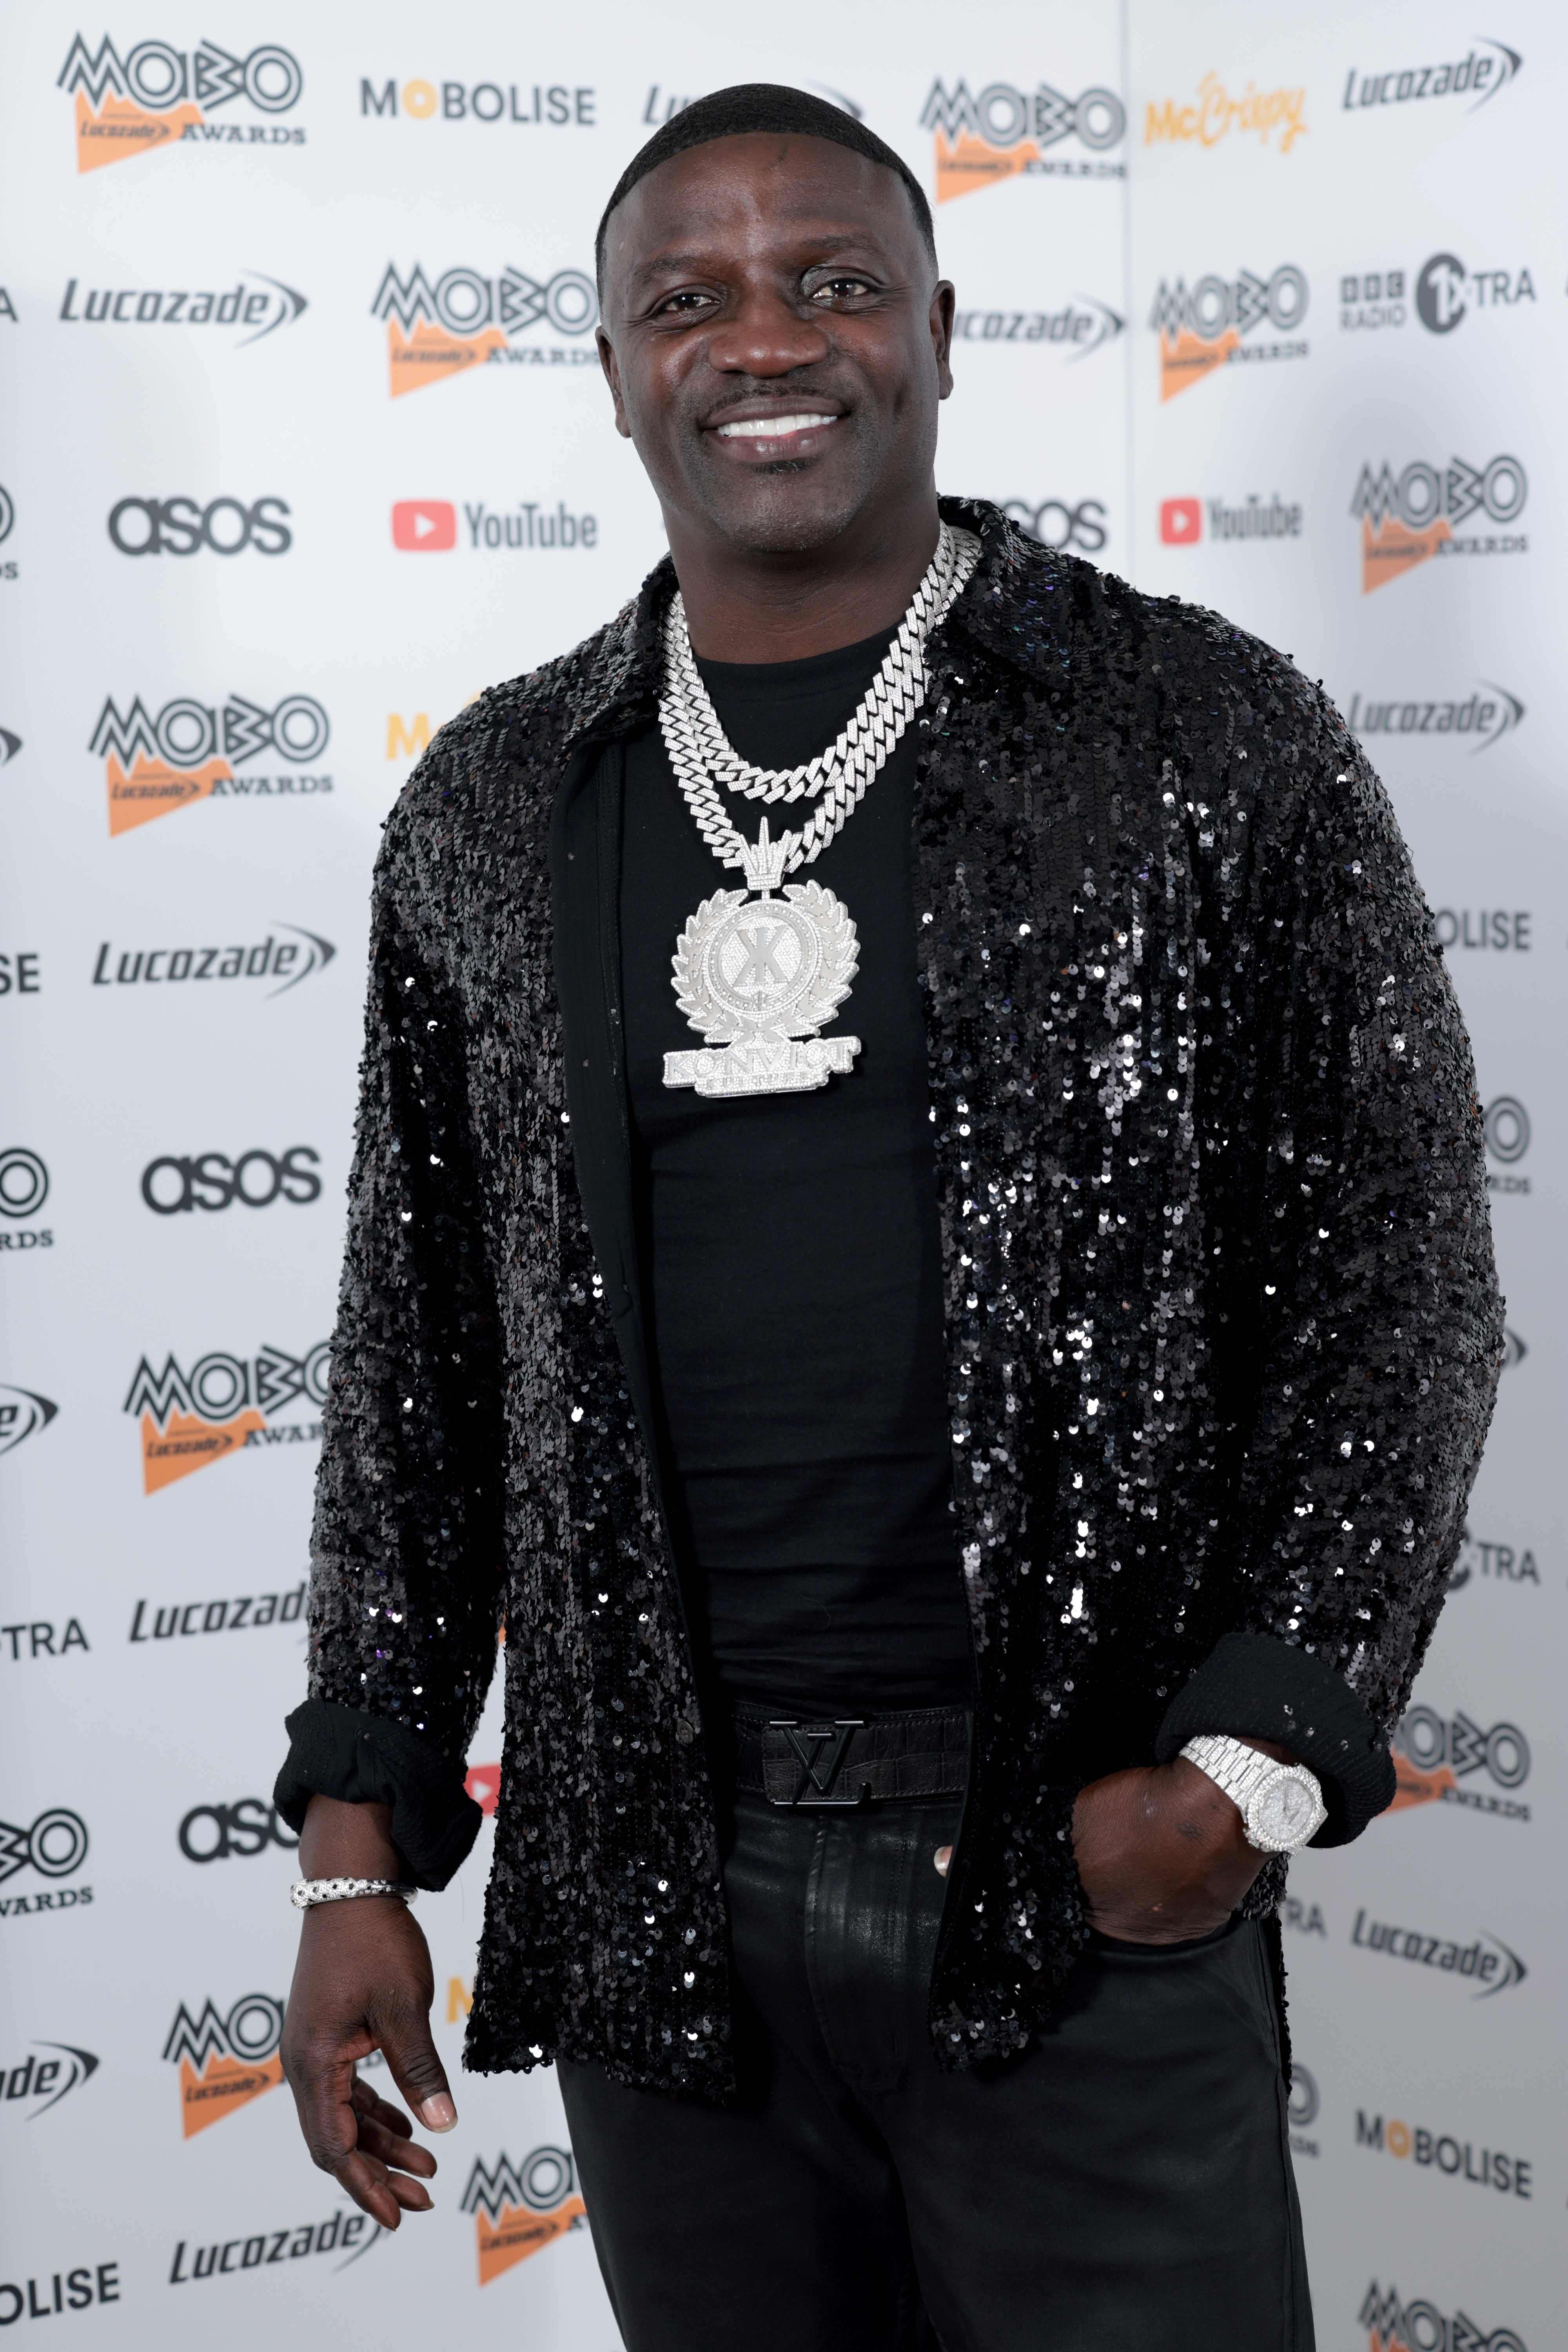 Akon poses in the Winners Room at the MOBO Awards on November 30, 2022, in London, England | Source: Getty Images